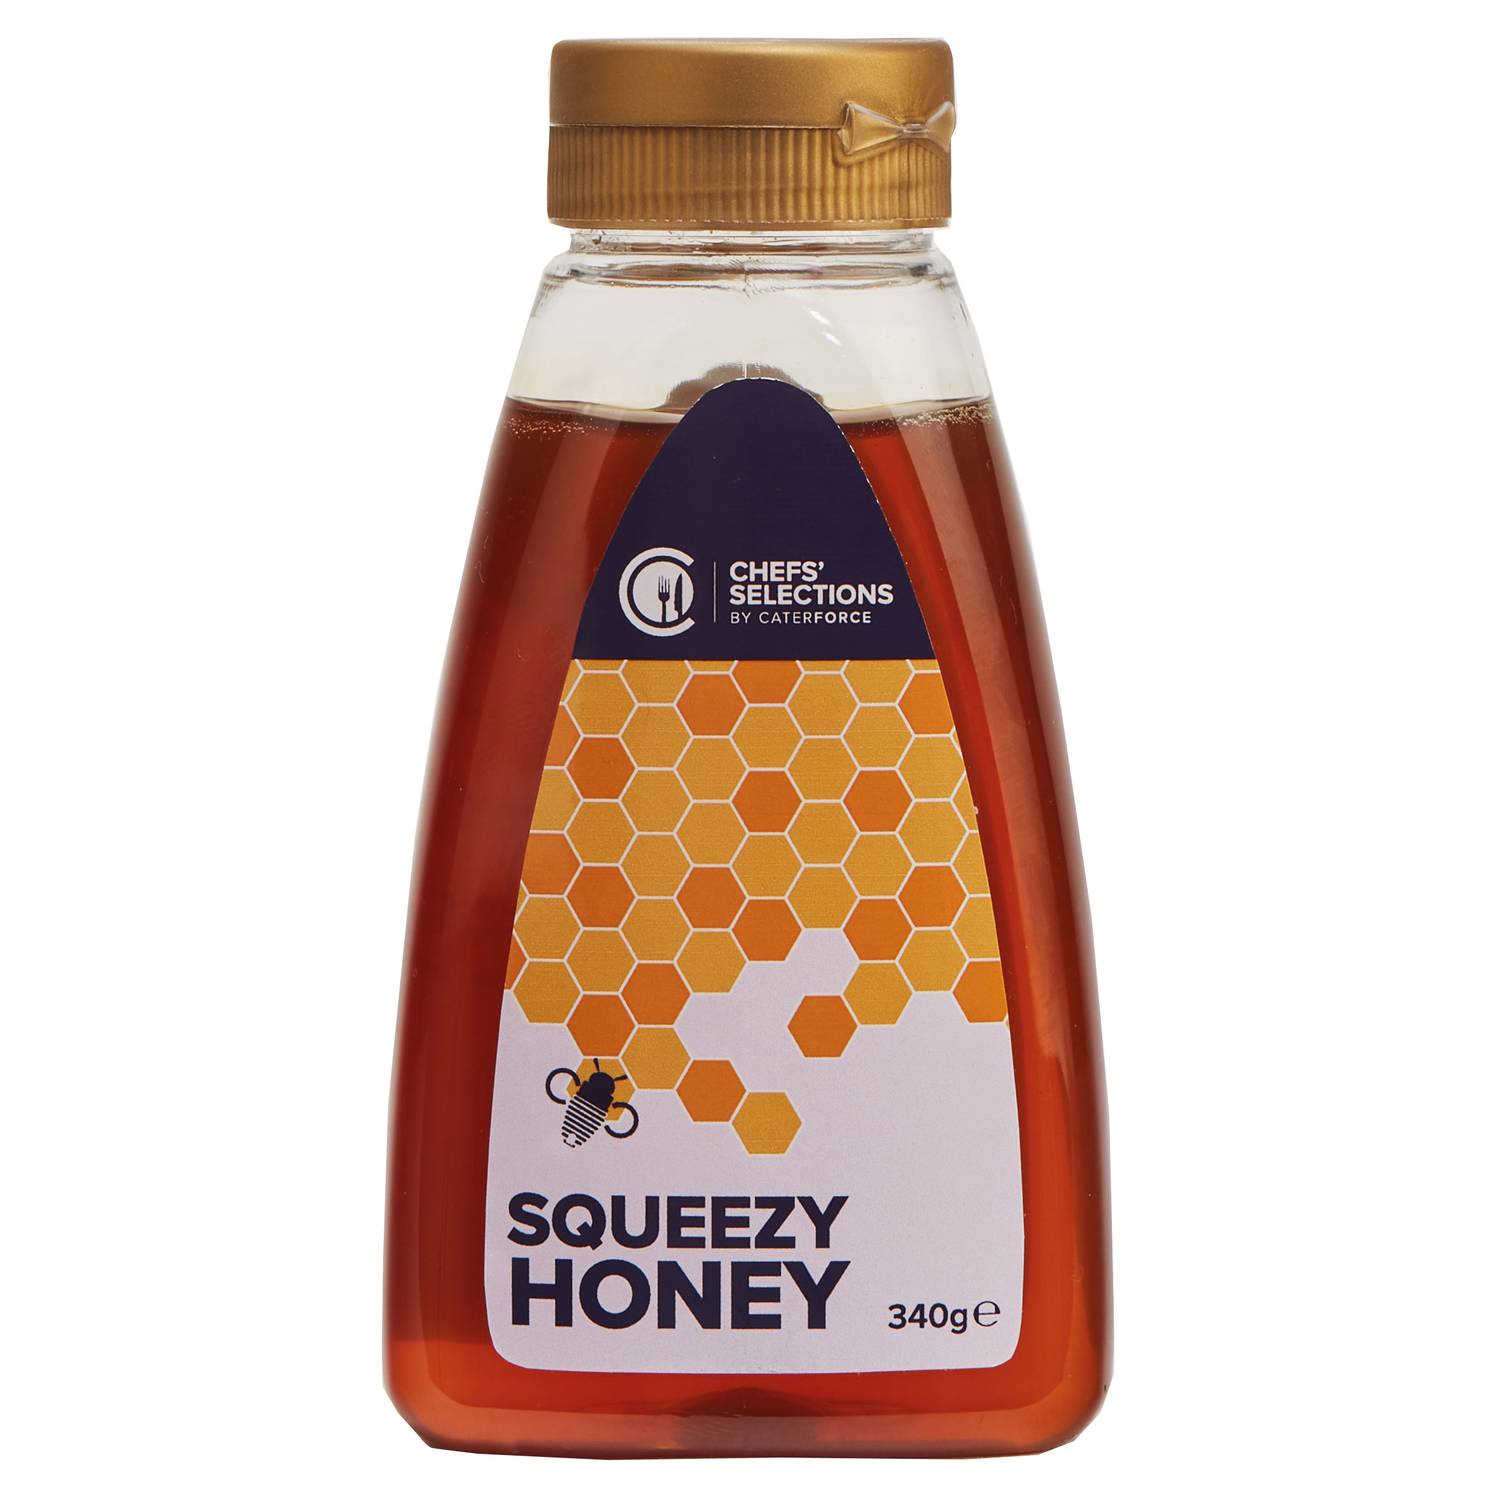 Chefs’ Selections Easy Squeezy Honey (6 x 340g)